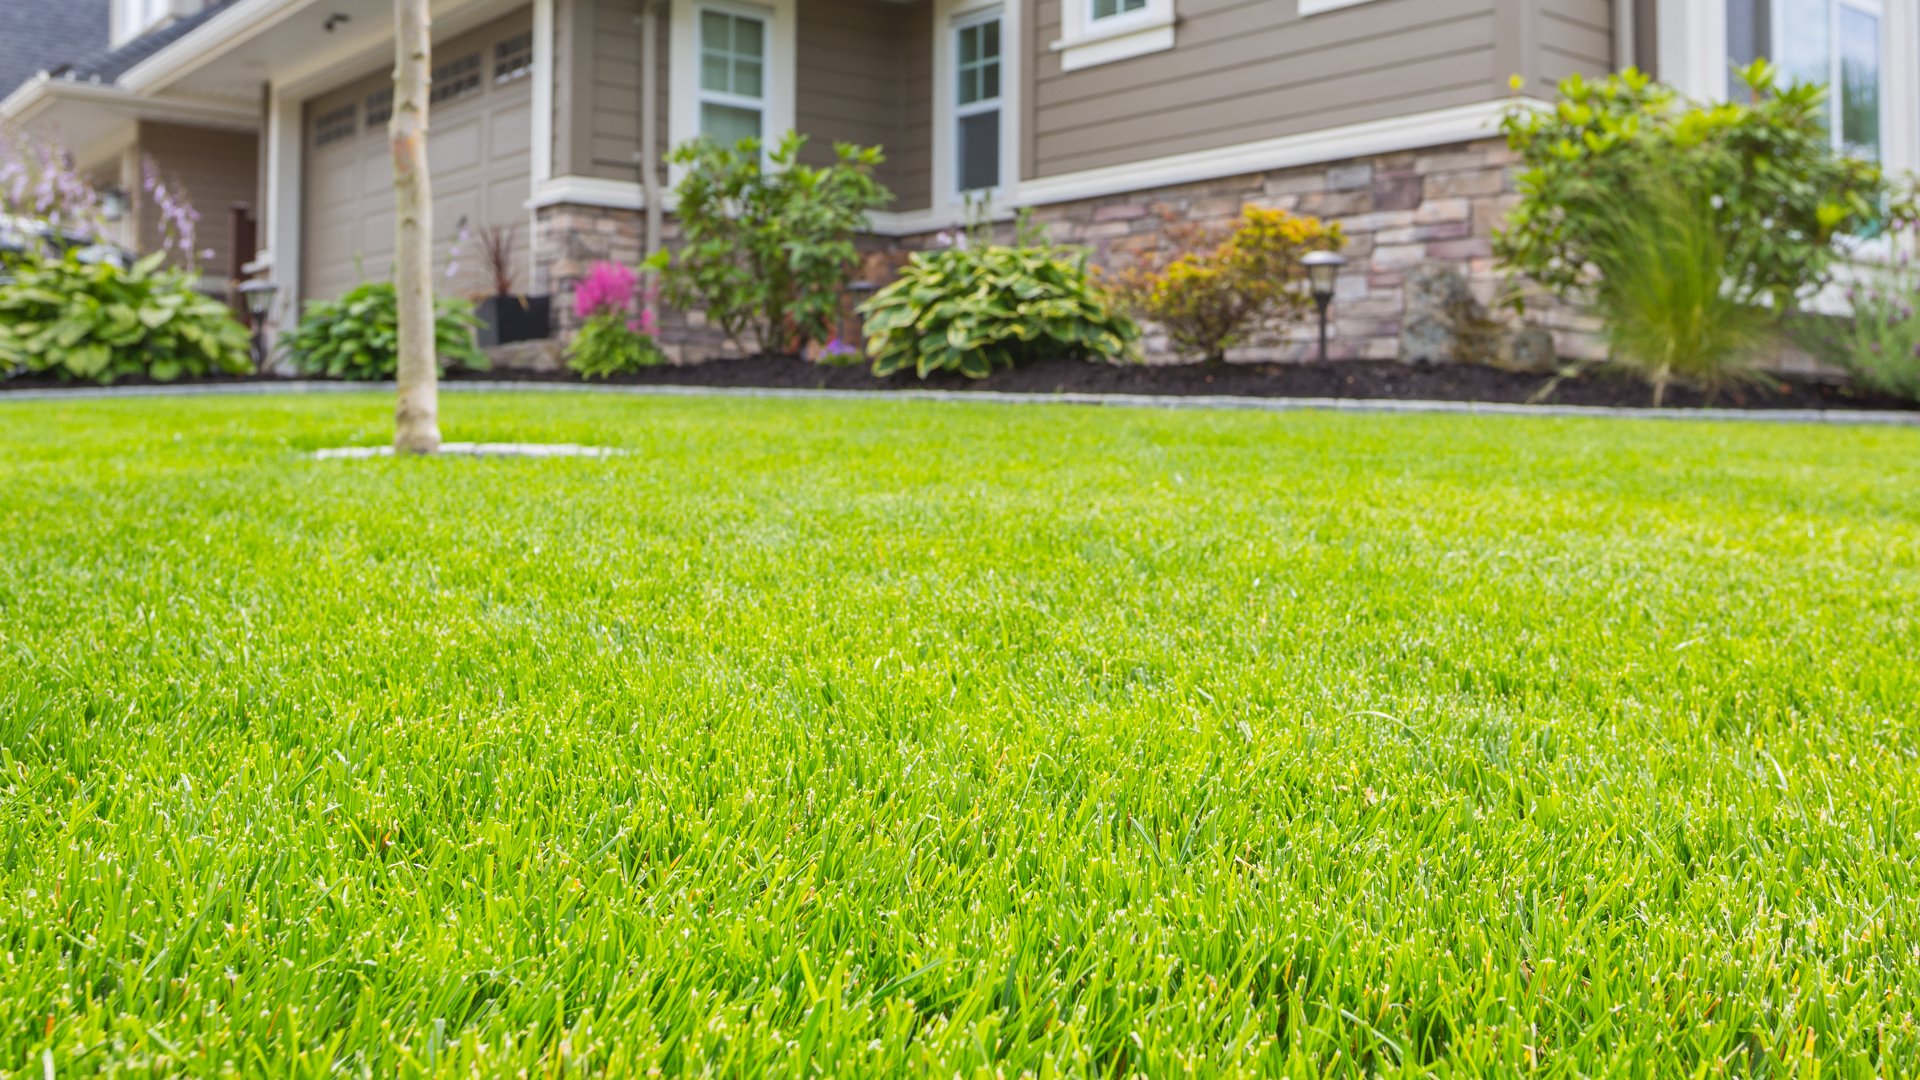 3 Lawn Care Services to Schedule in Spring if You Have Warm-Season Grass